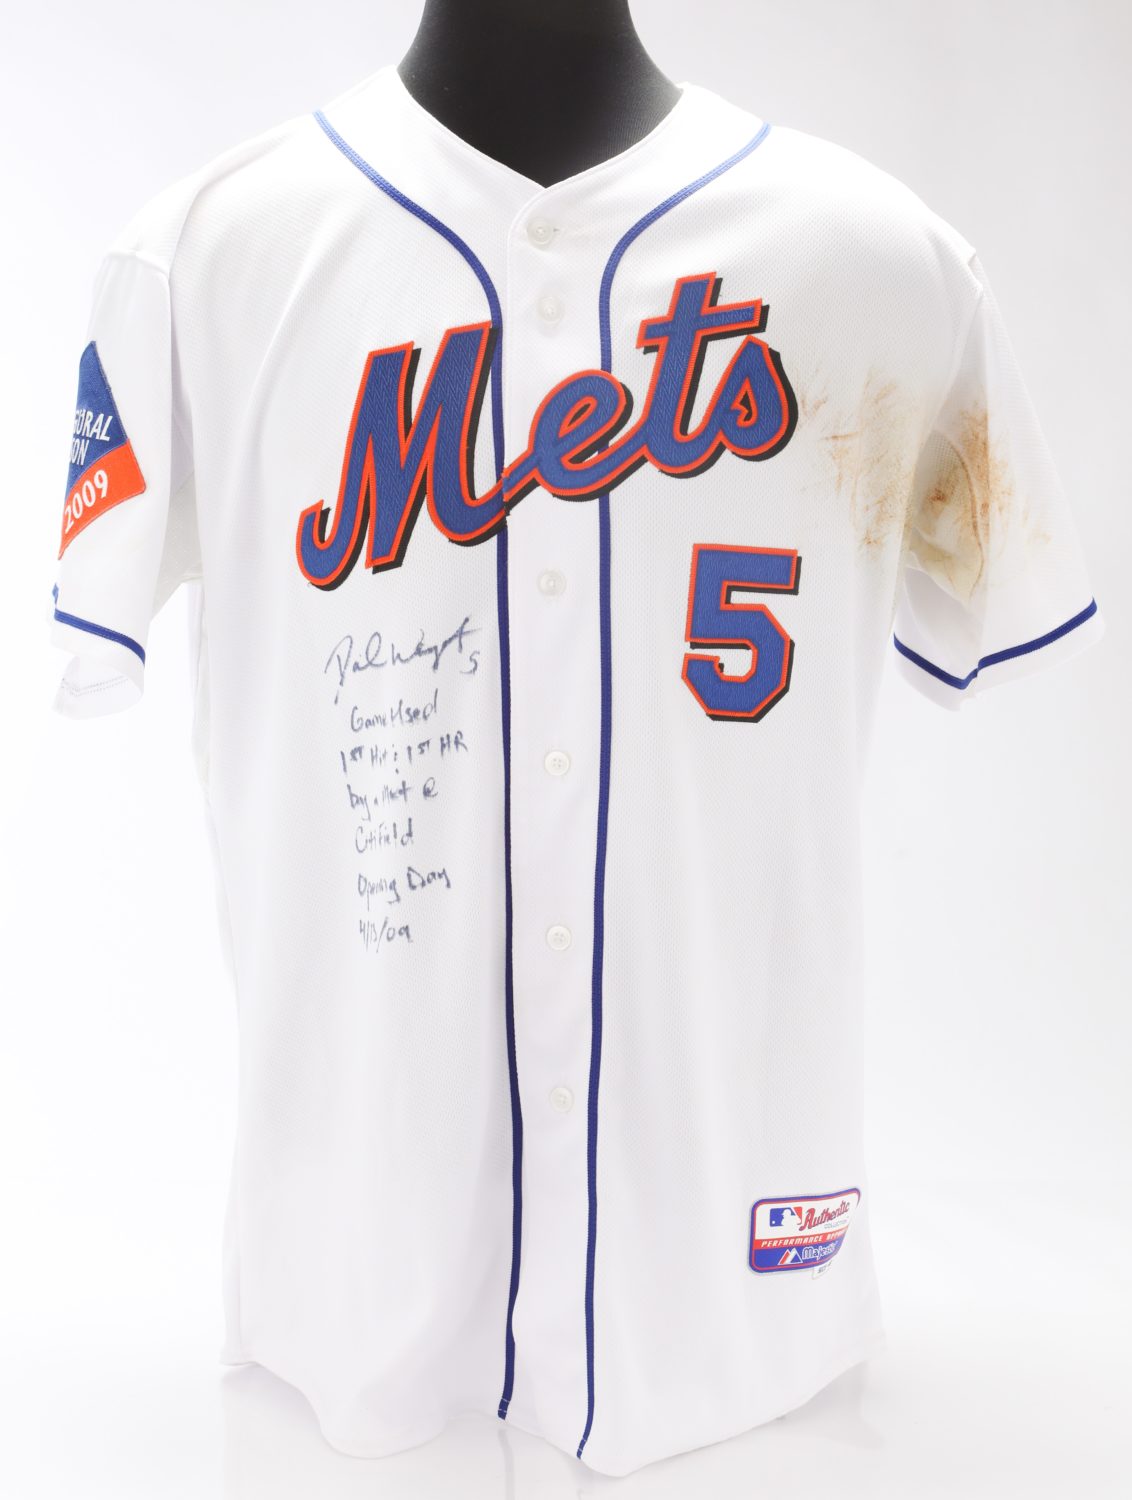 Wright Signed Jersey from First Citi Field Home Run 